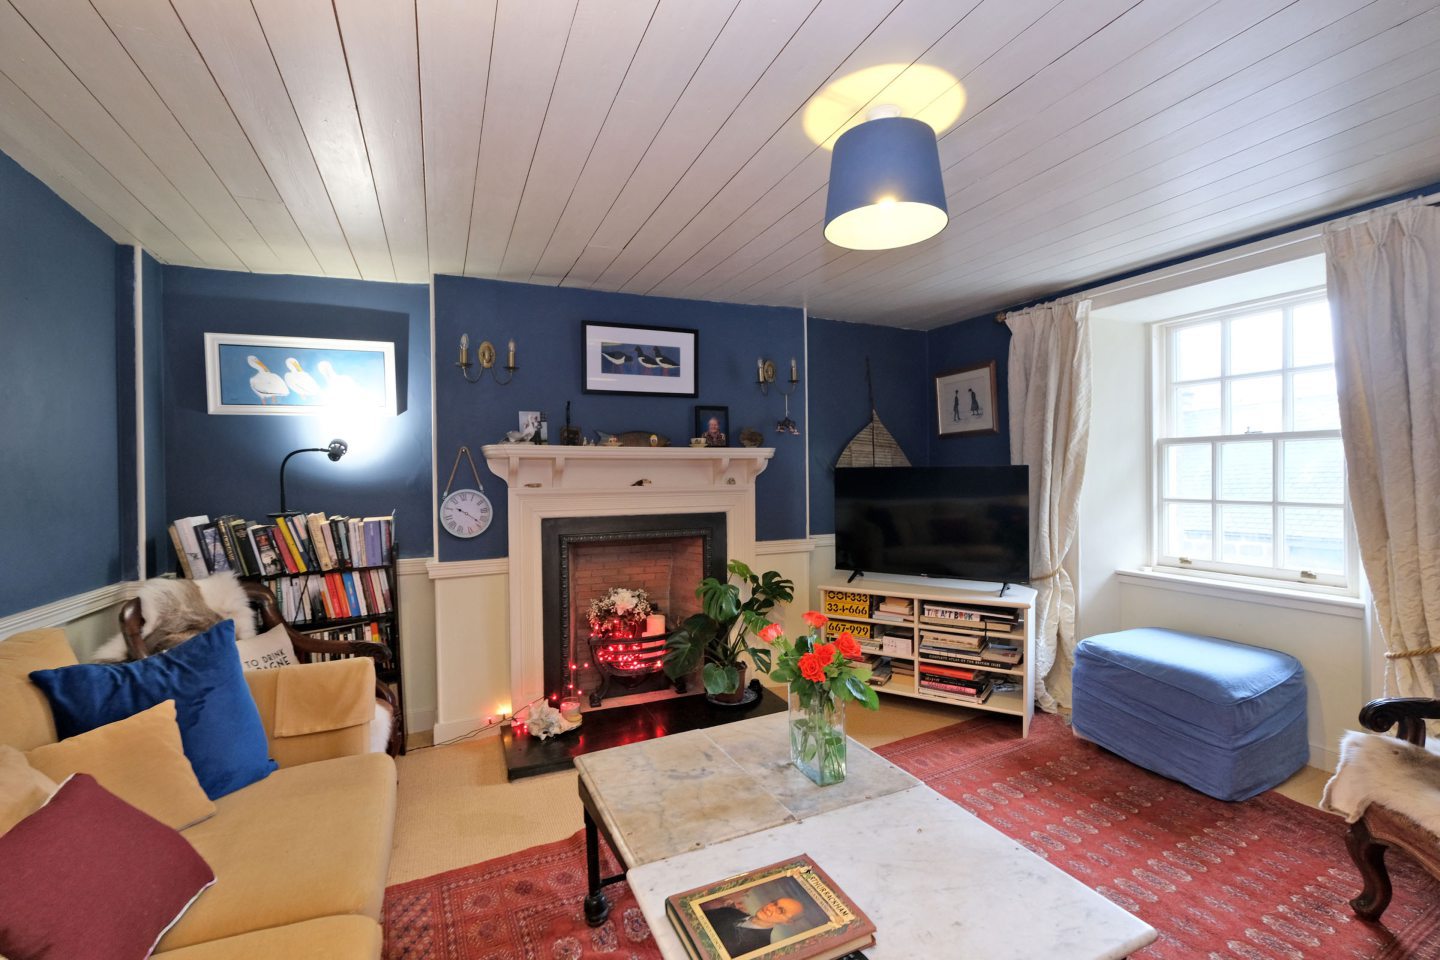 Cosy sitting area inside the Aberdeen artist's home featuring blue walls and white wood panelled ceiling.